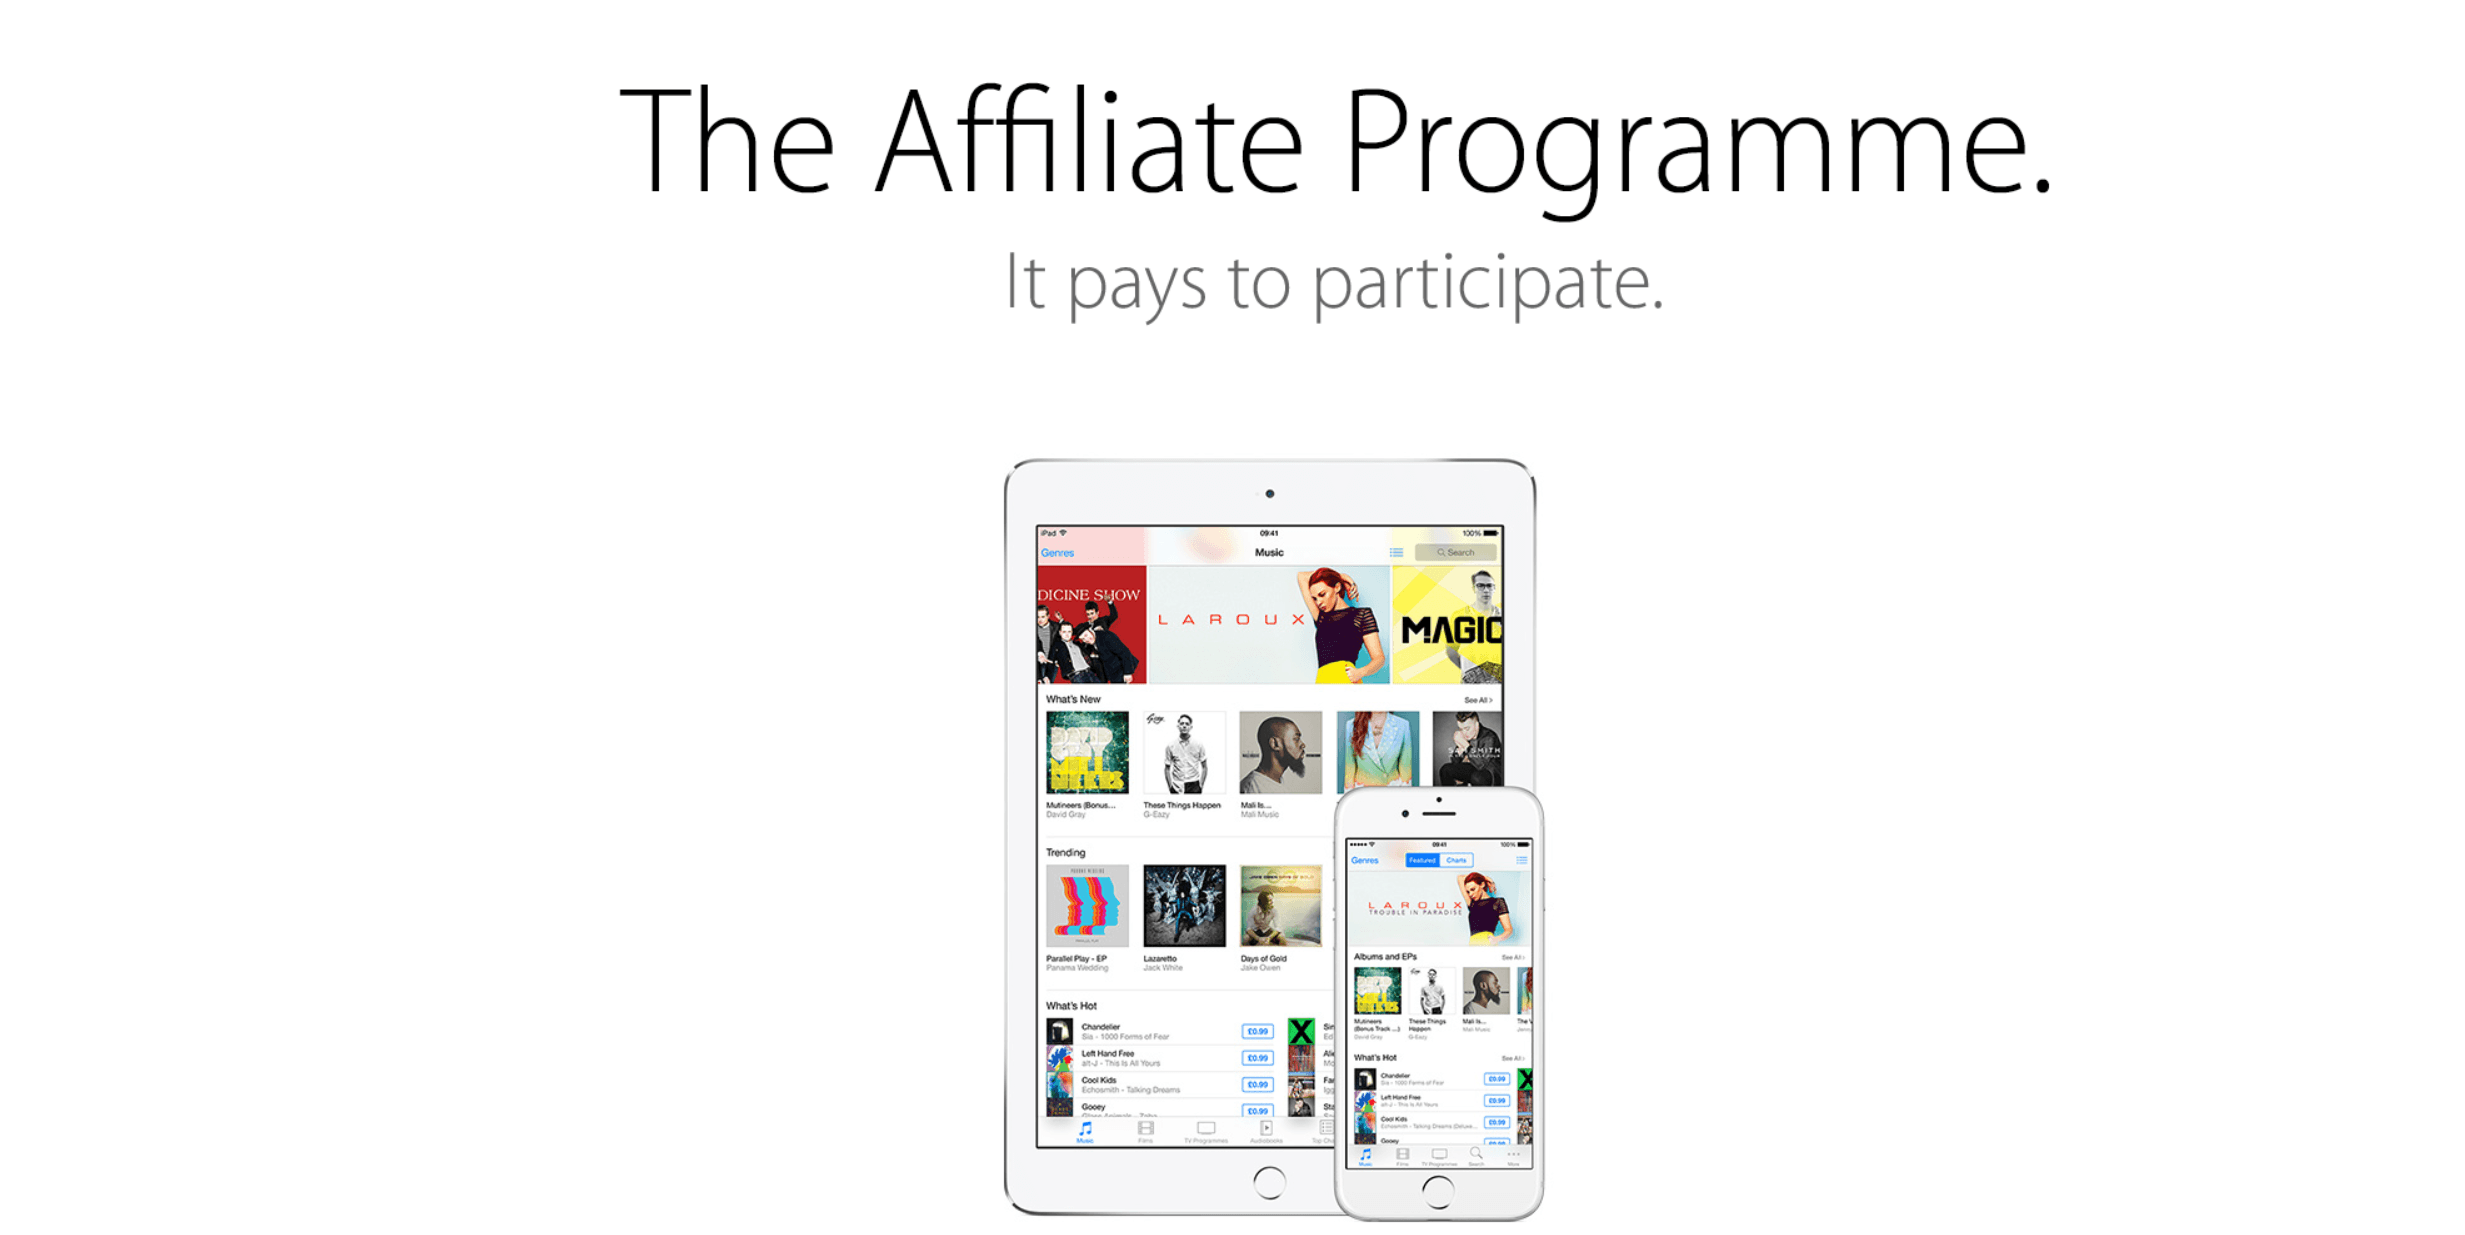 11 of the Highest Paying Affiliate Programs